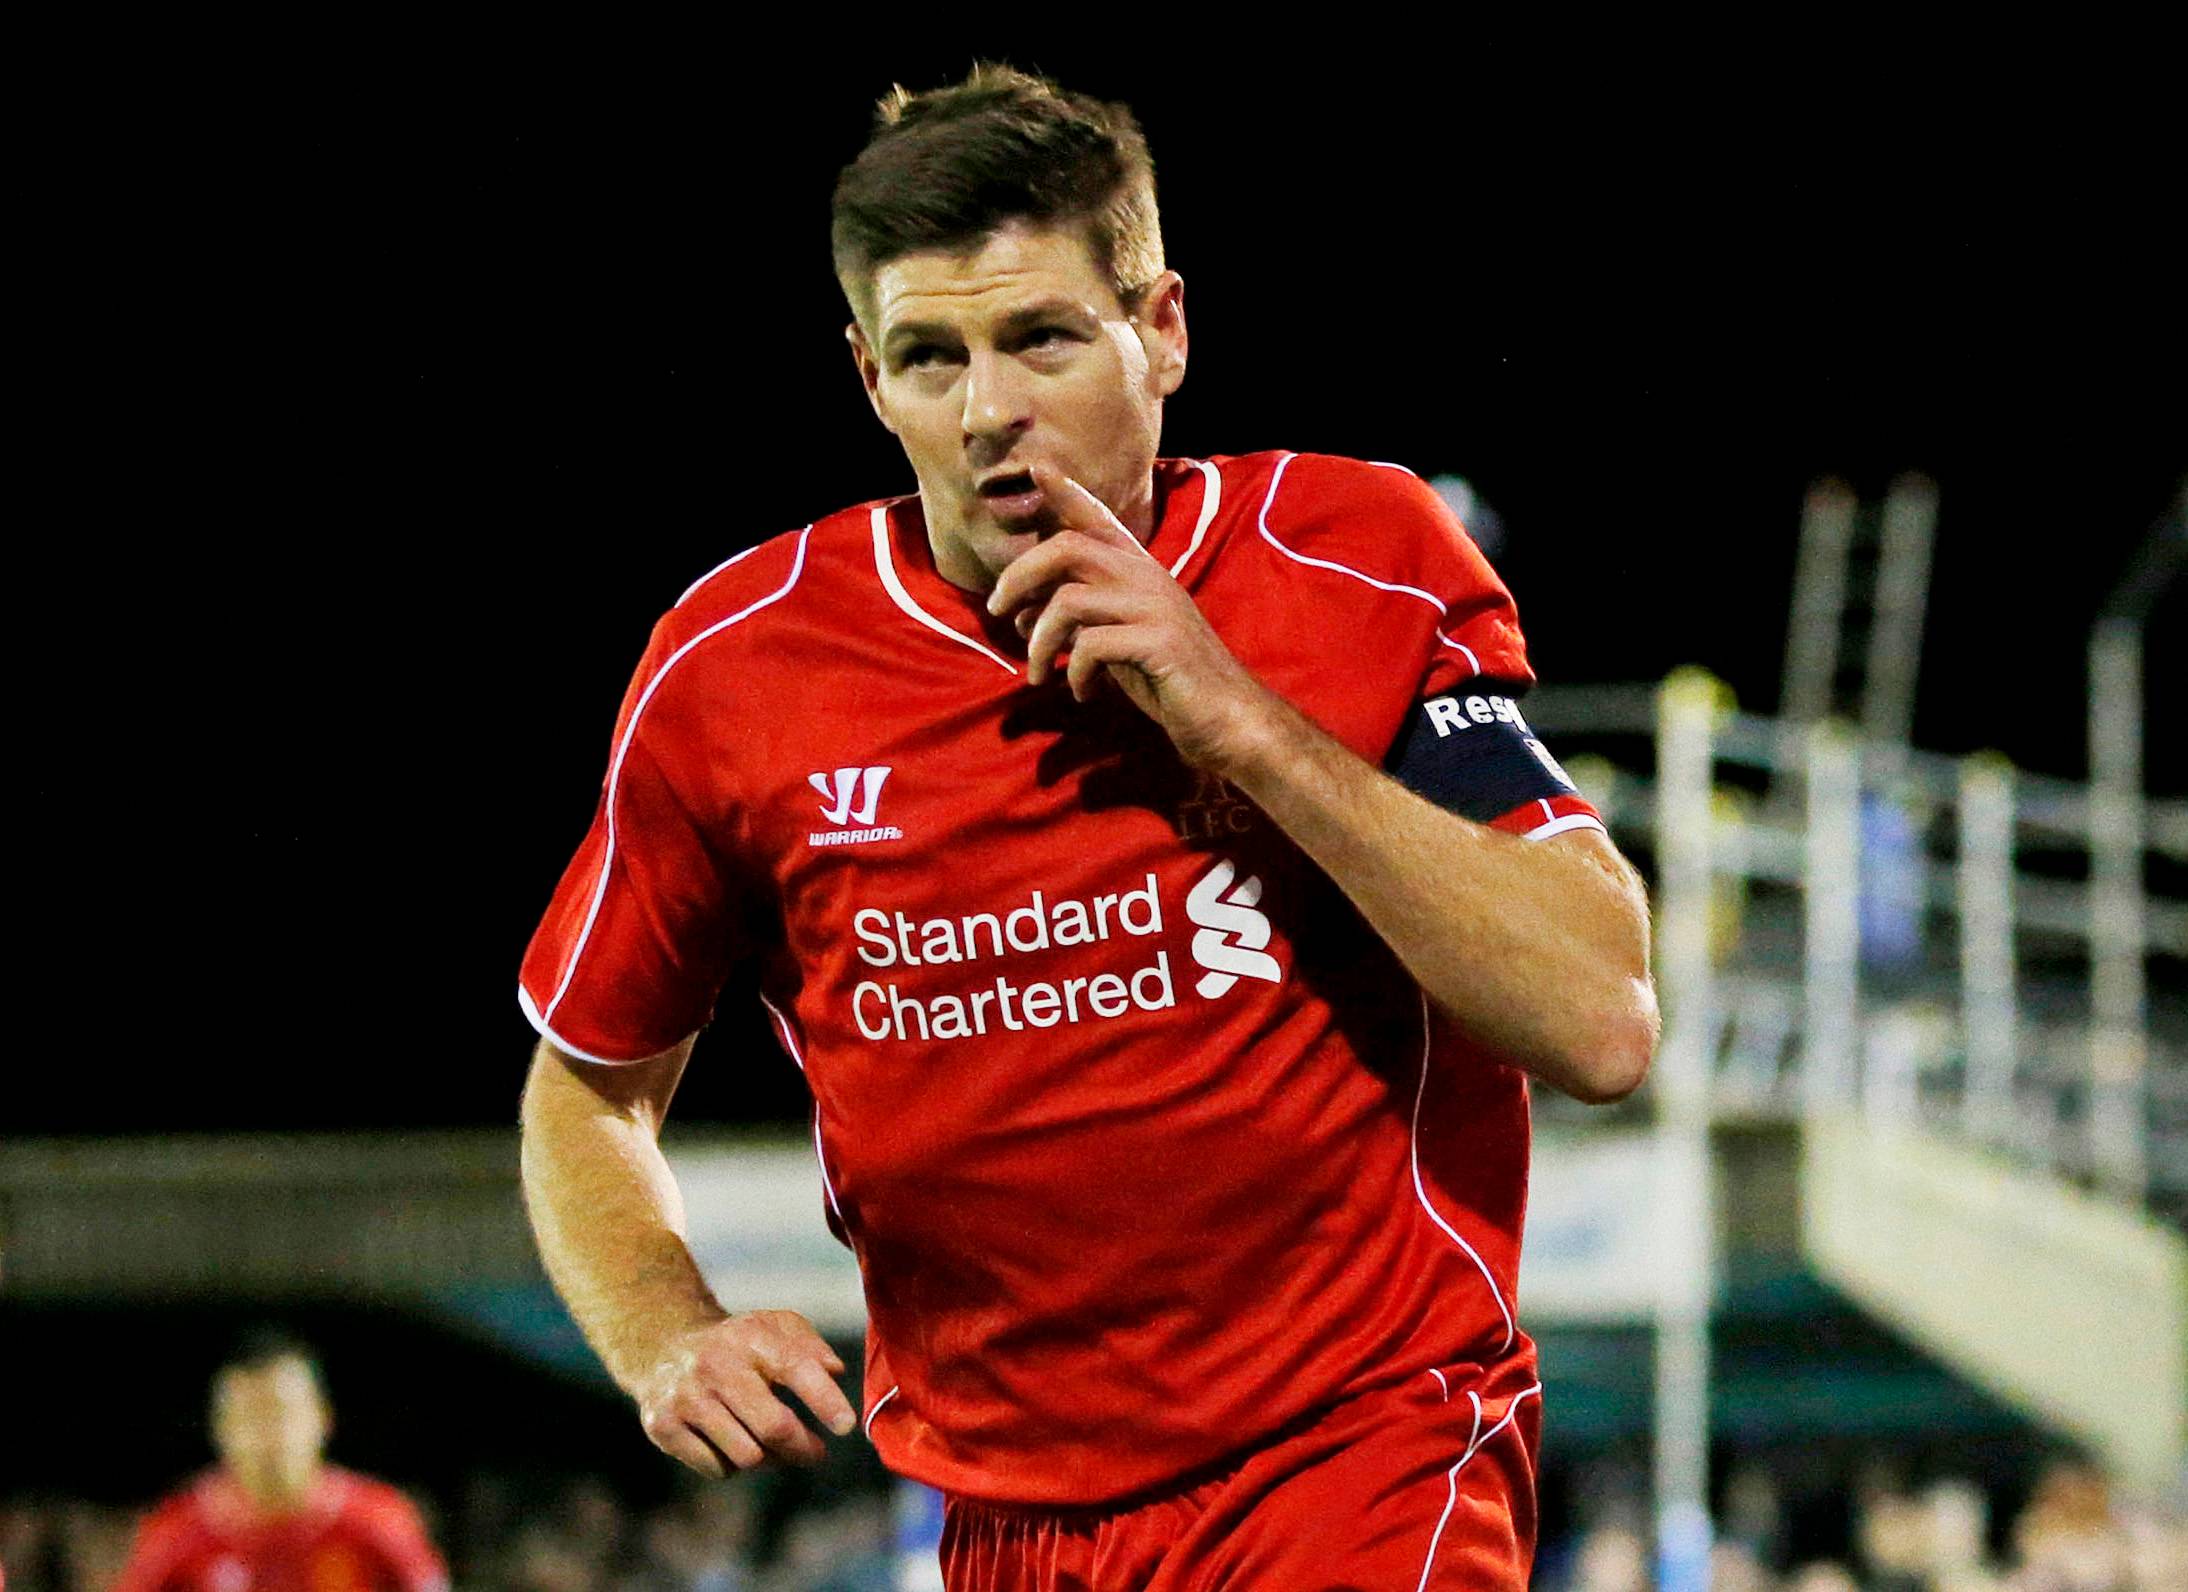 Steven Gerrard in action for Liverpool vs AFC Wimbledon in 2015